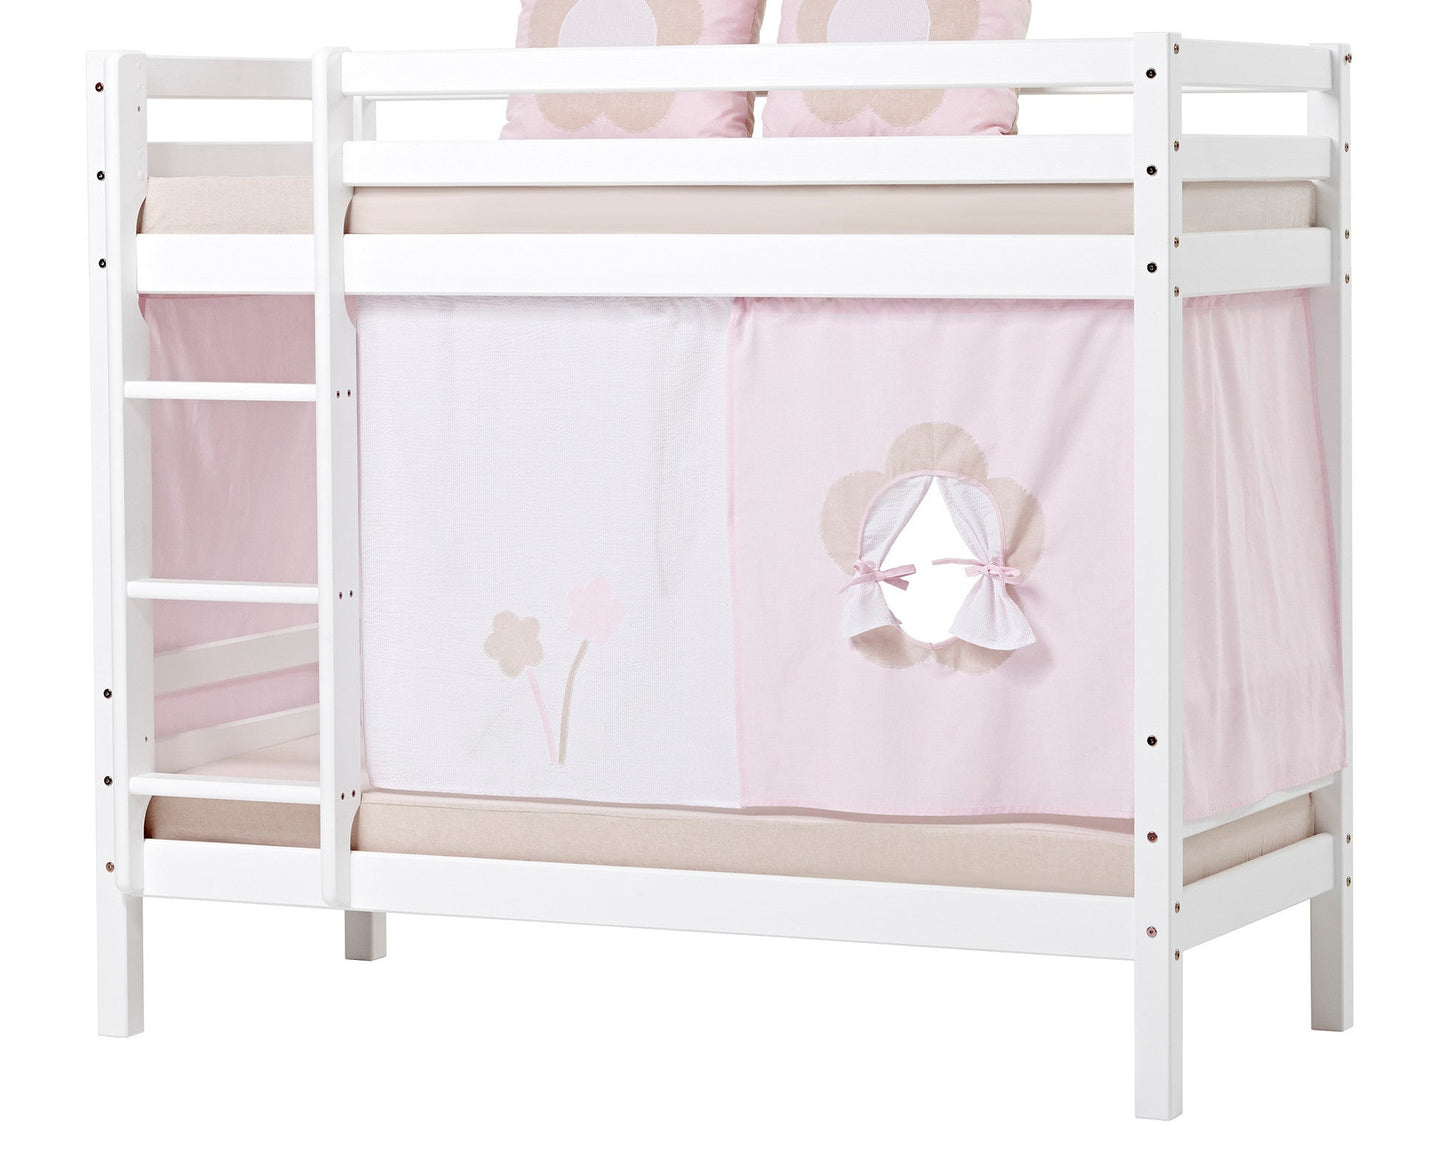 Fairytale Flower - Curtain for half-high and bunk bed - 70x160 cm